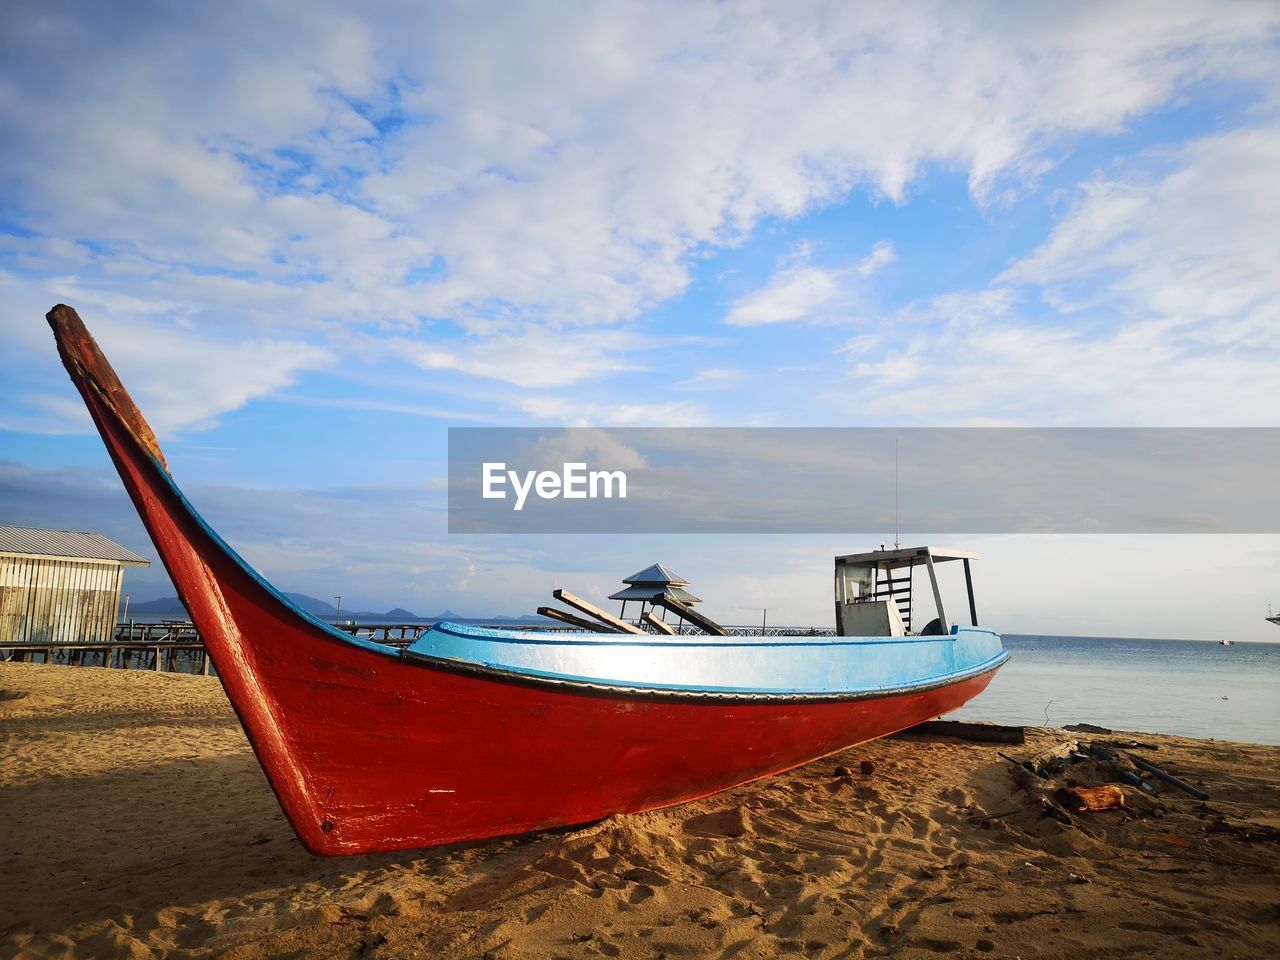 FISHING BOAT MOORED ON BEACH AGAINST SKY